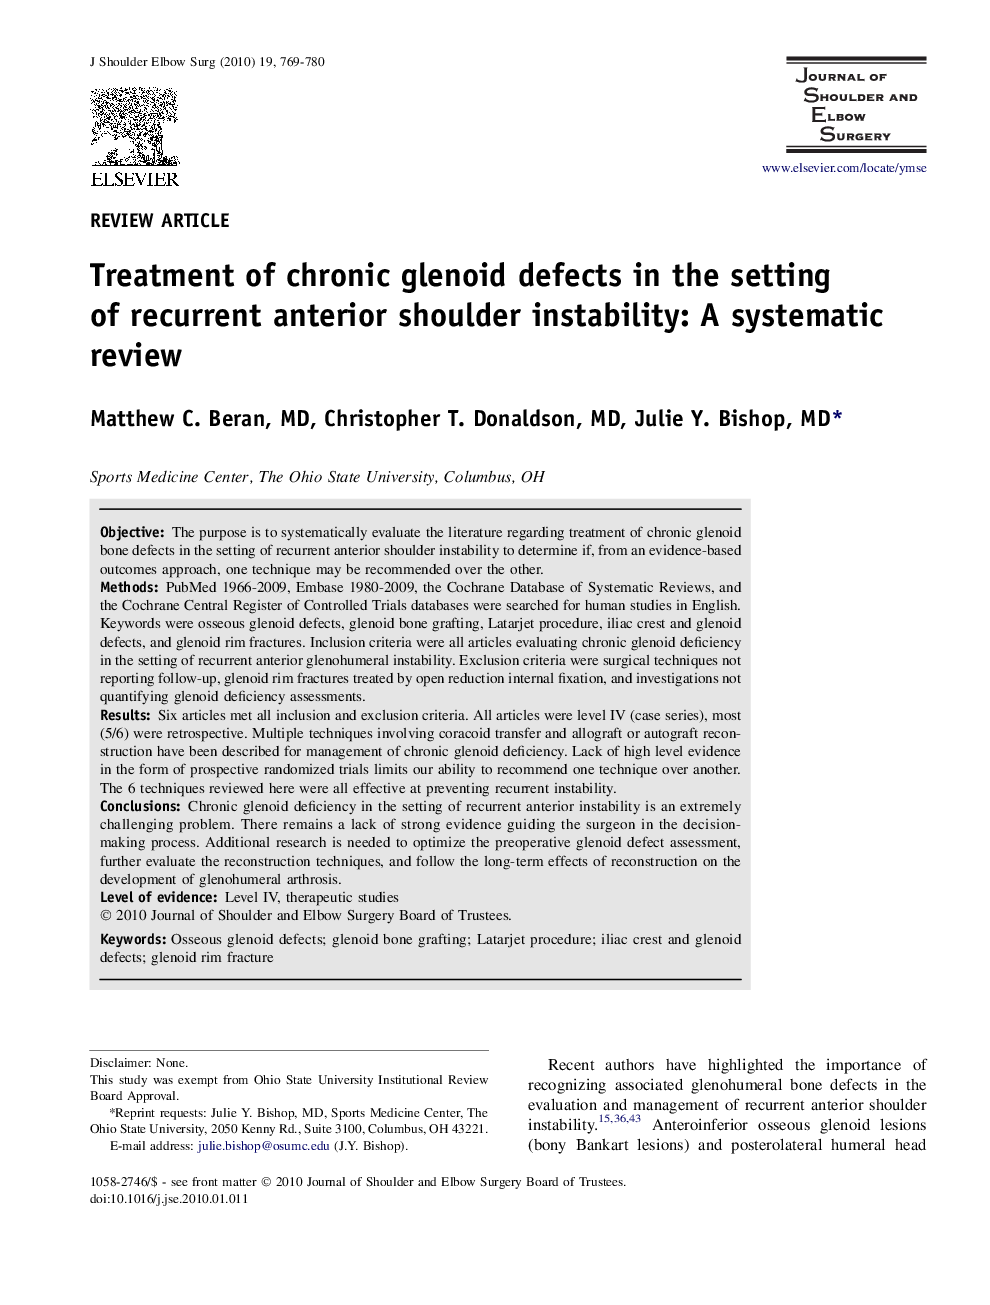 Treatment of chronic glenoid defects in the setting of recurrent anterior shoulder instability: A systematic review 